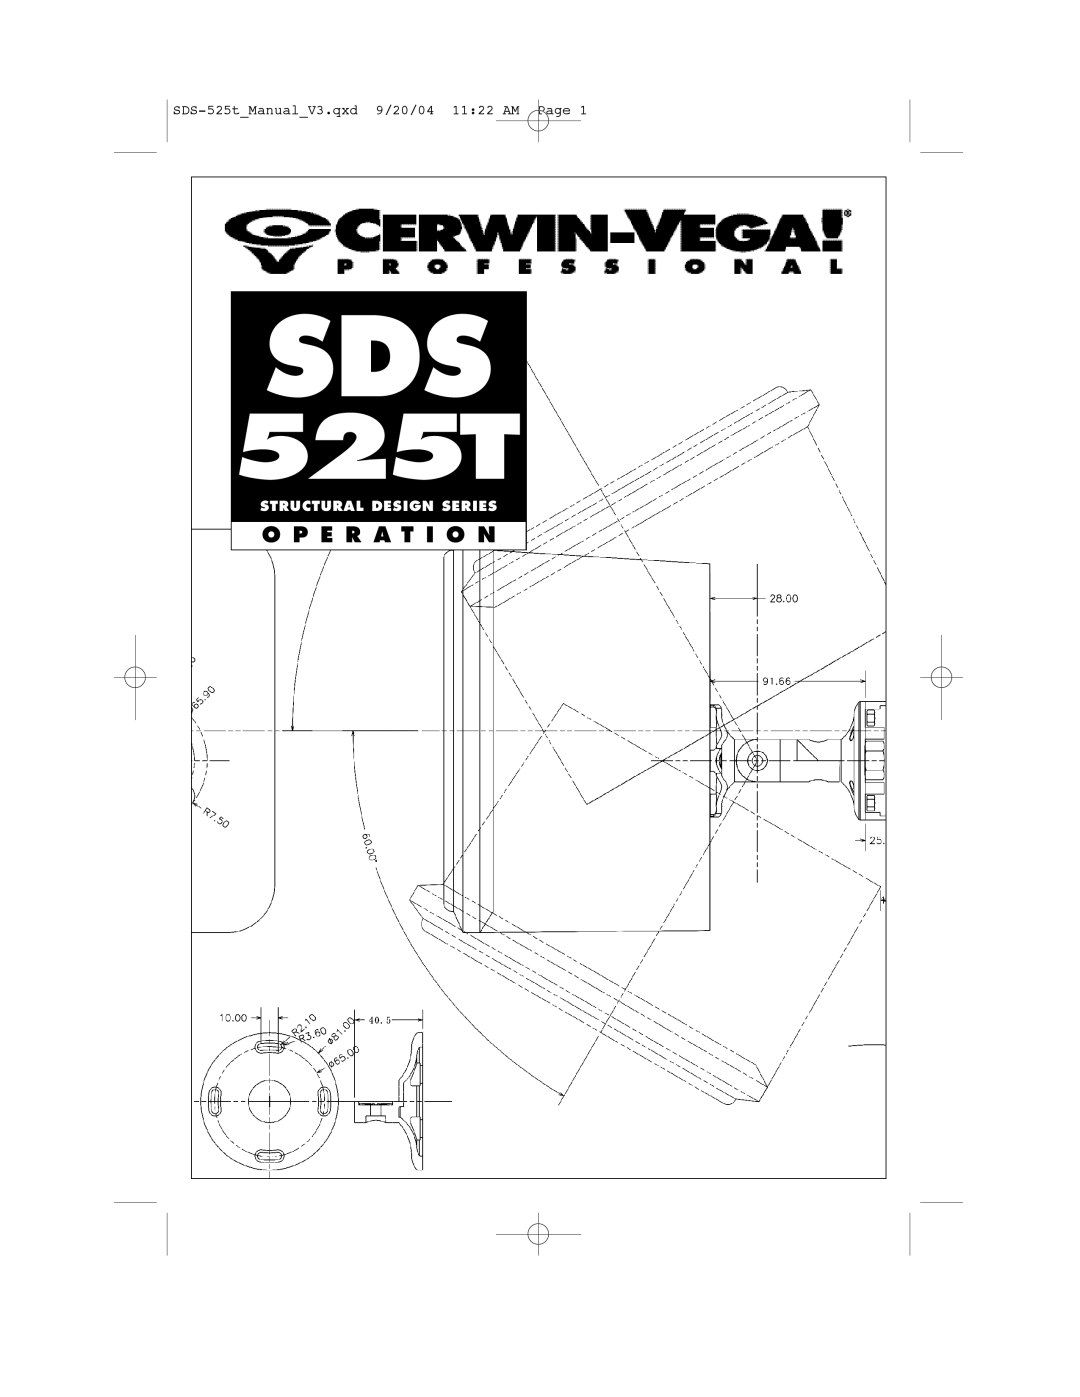 Cerwin-Vega SDS-525T manual O P E R A T I O N, 5 2 5 T, SDS-525t Manual V3.qxd9/20/04 11 22 AM Page 